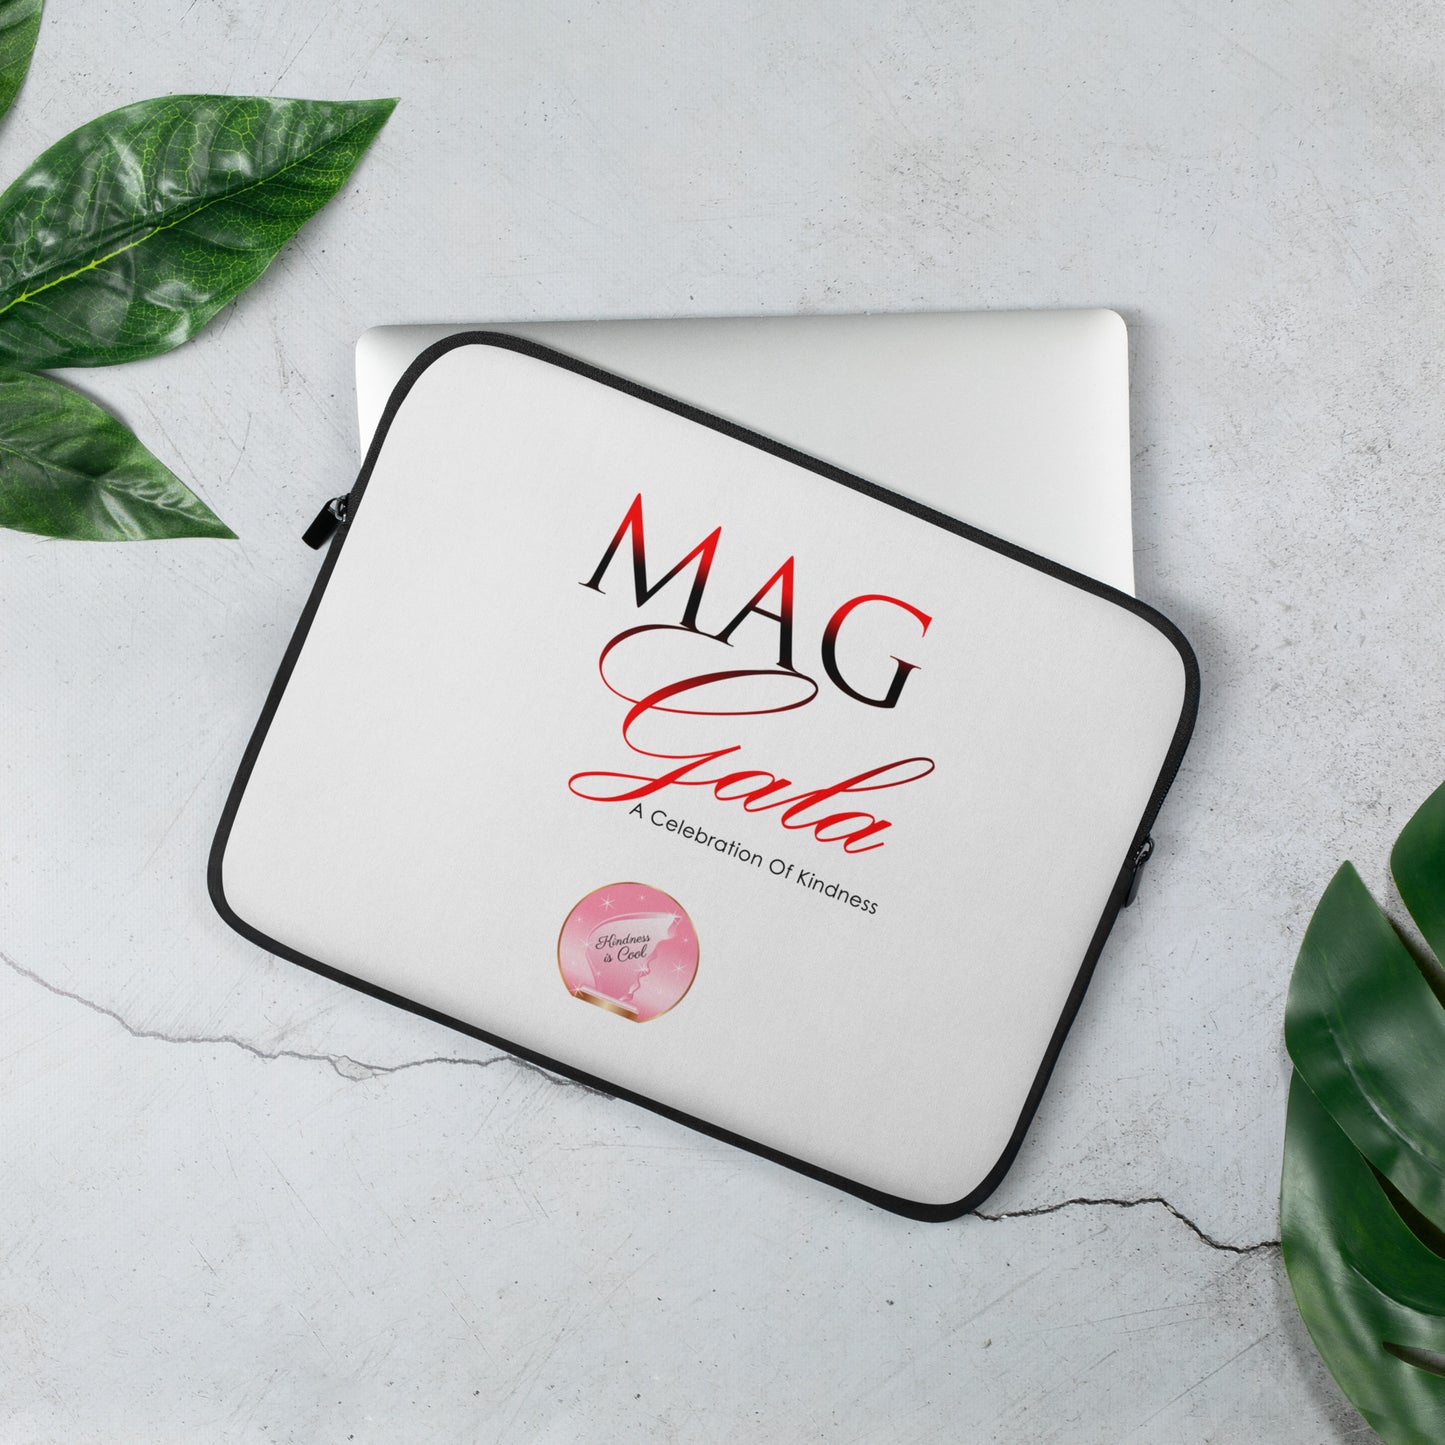 MAG Gala  Kindness is cool Laptop Sleeve